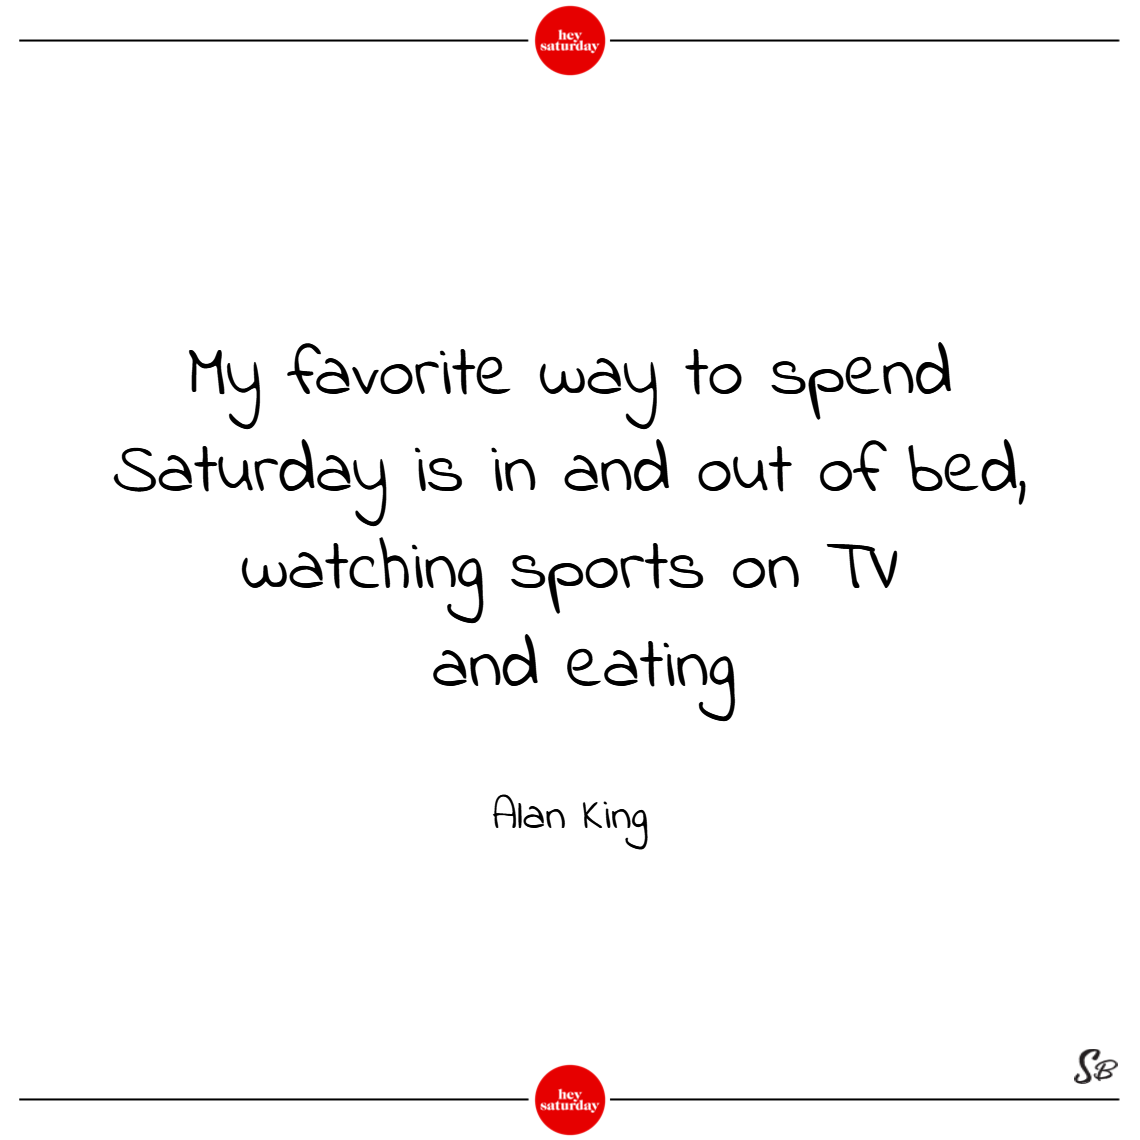 My favorite way to spend saturday is in and out of bed, watching sports on tv and eating. - alan king